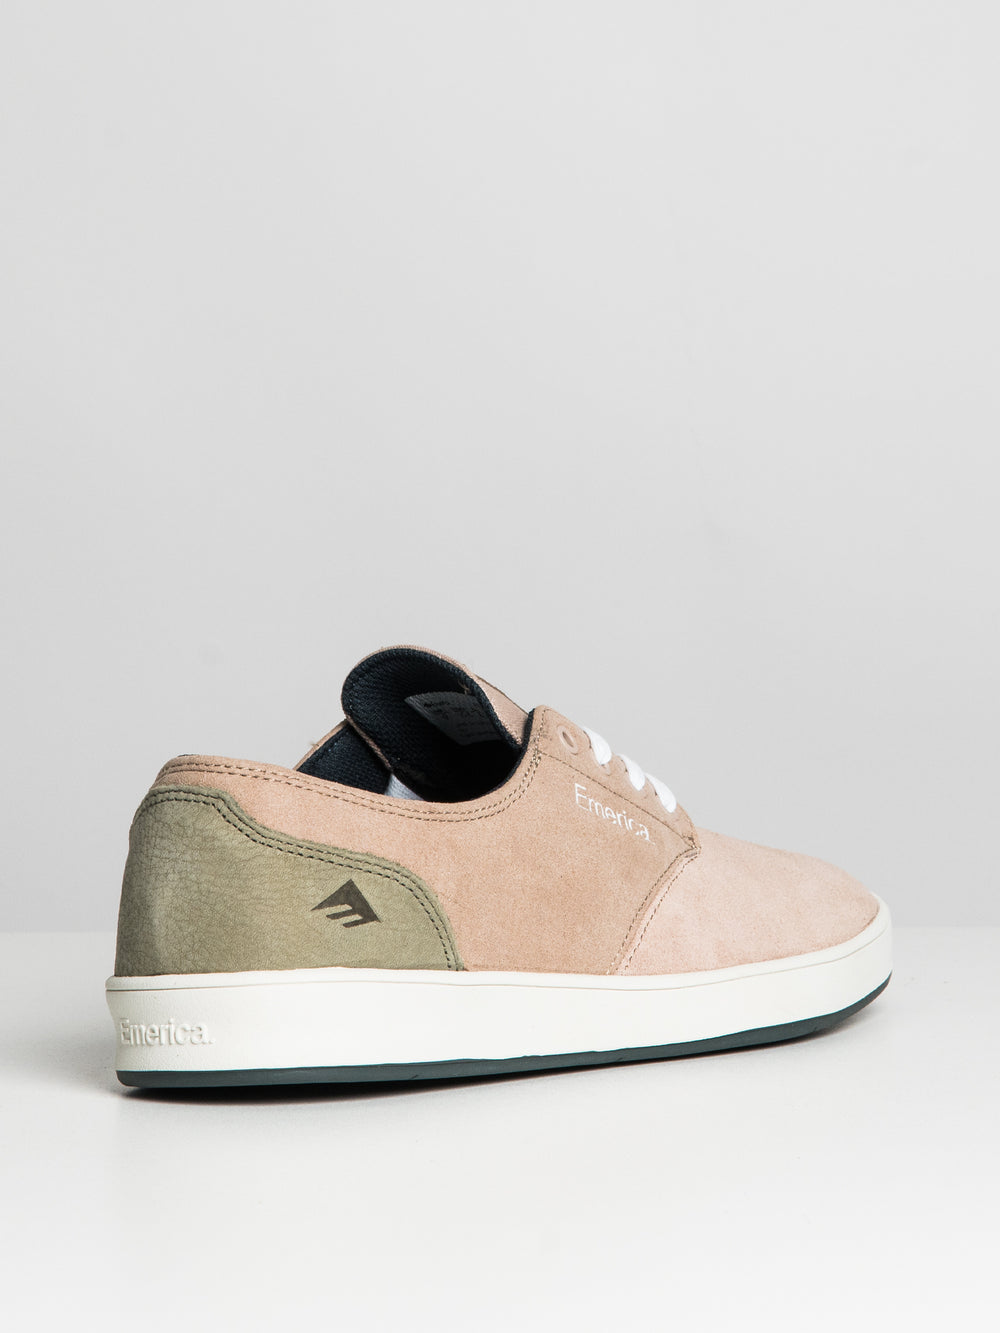 MENS EMERICA THE ROMERO LACED - CLEARANCE